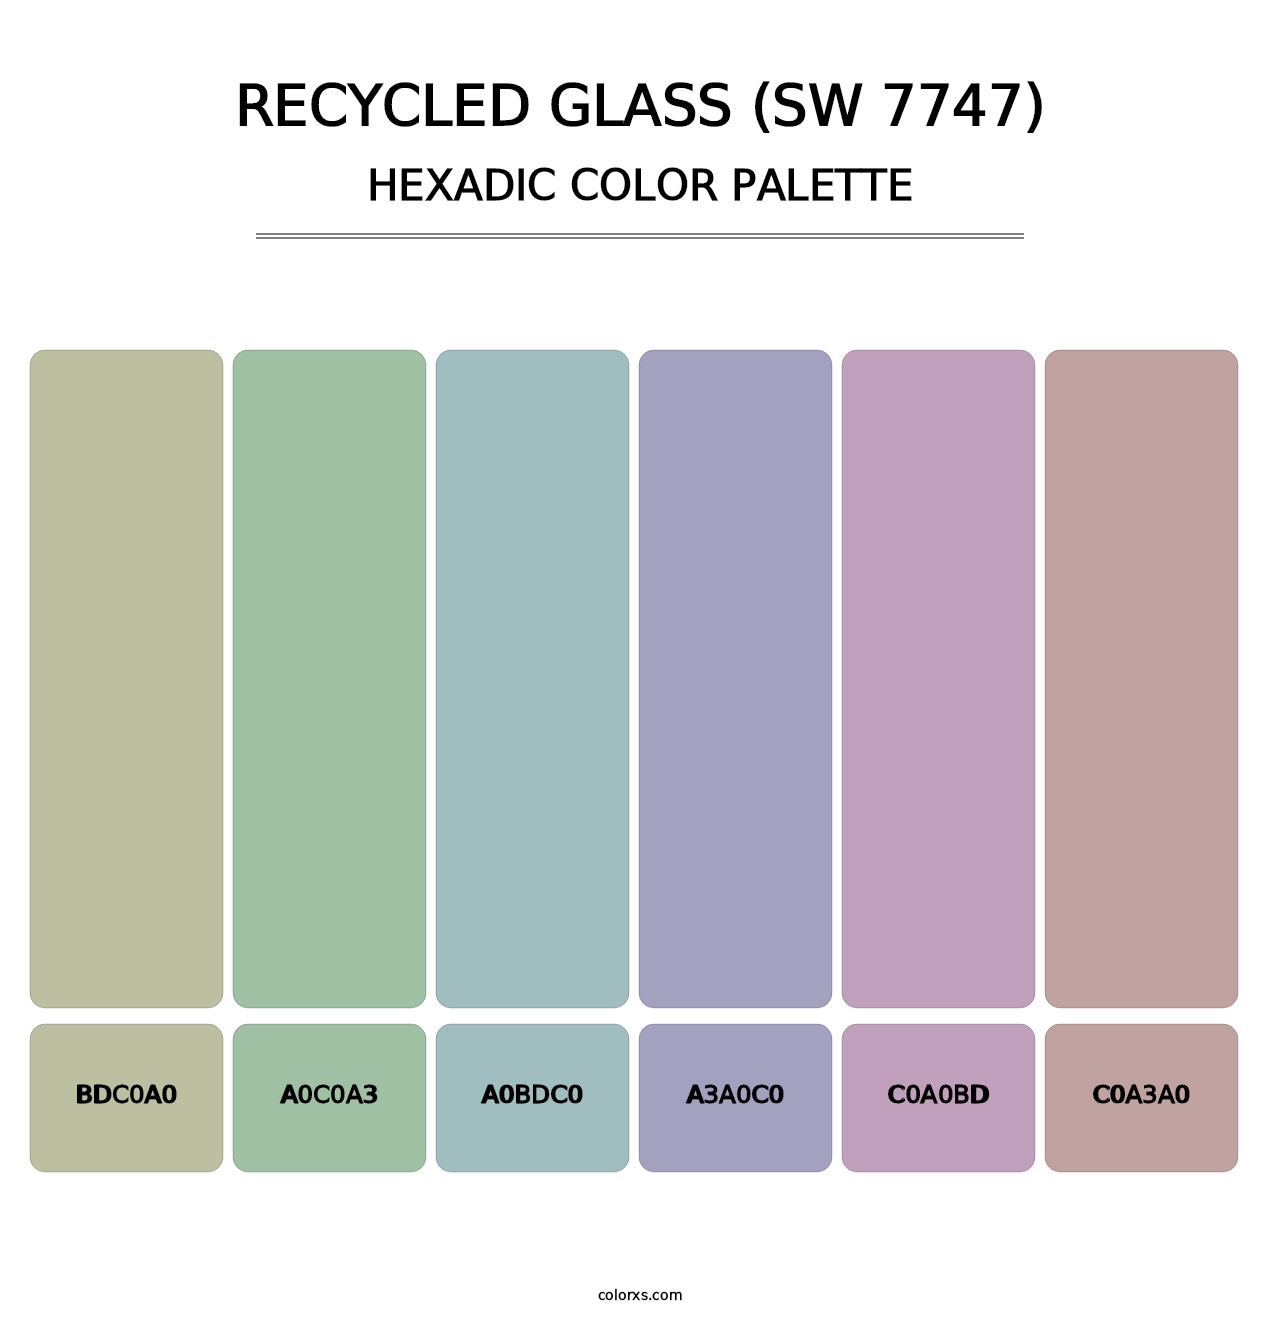 Recycled Glass (SW 7747) - Hexadic Color Palette